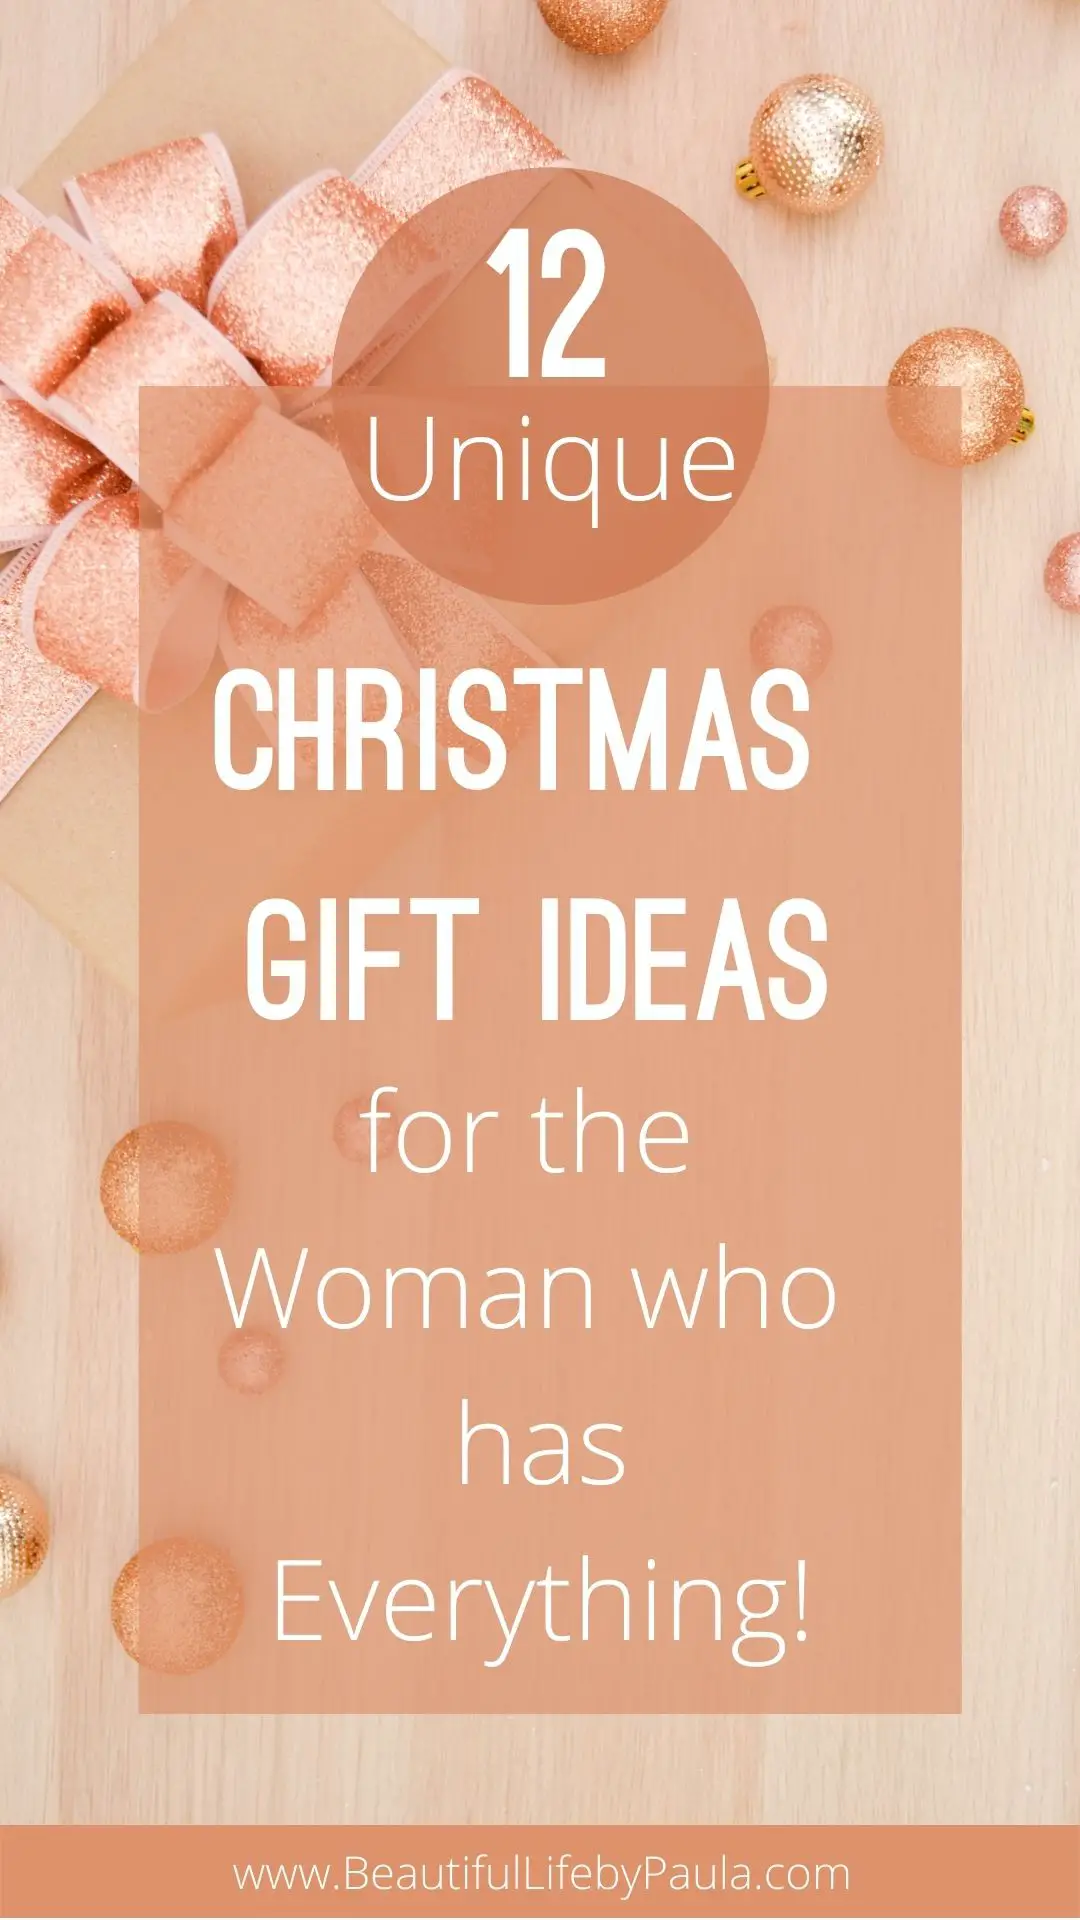 Christmas gifts for woman who has everything